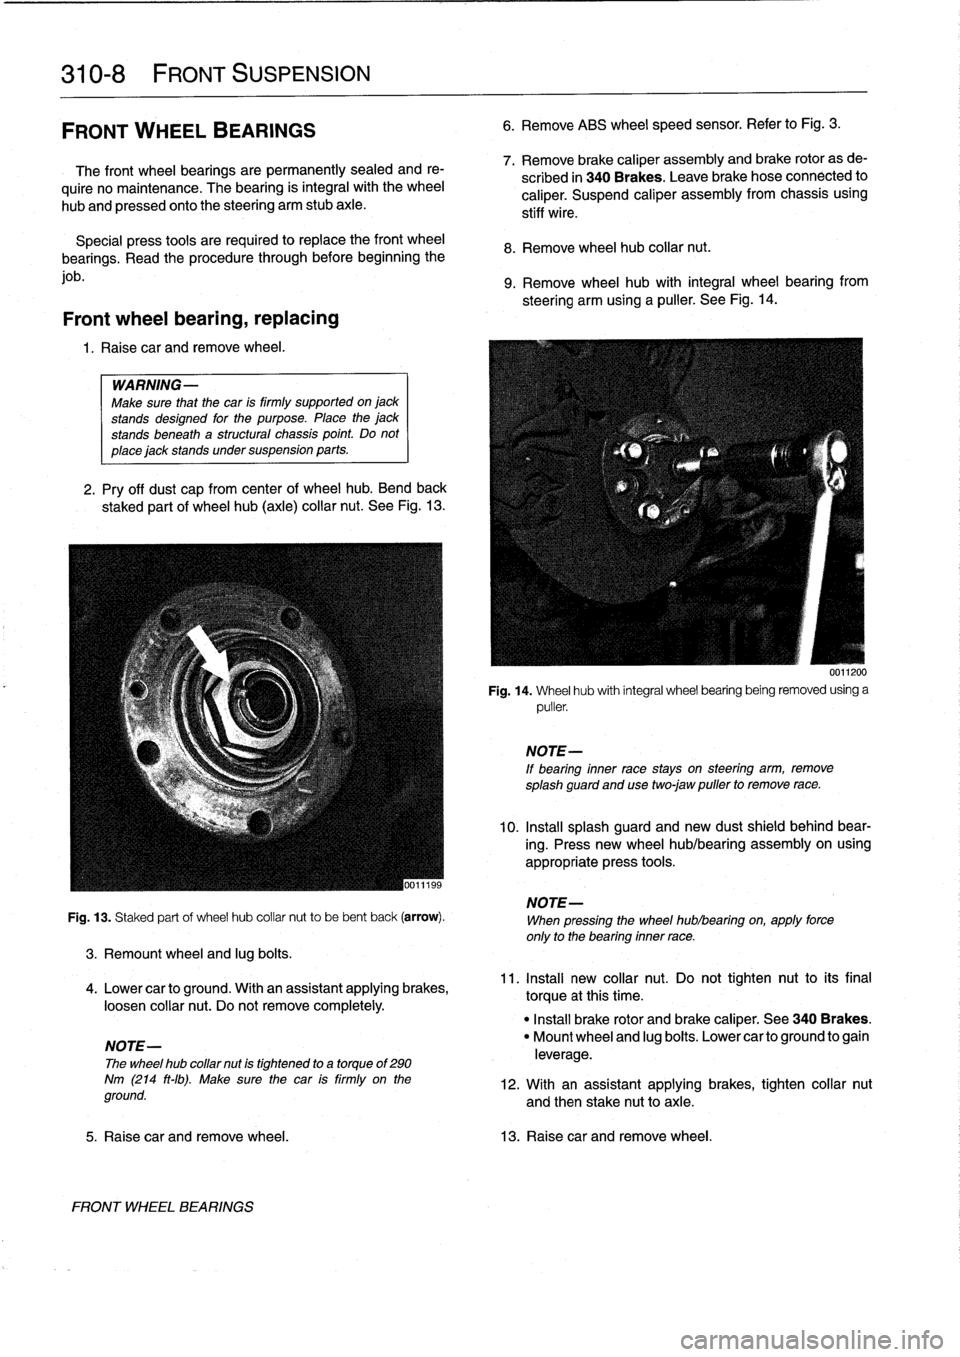 BMW 323i 1995 E36 Workshop Manual 
310-
8

	

FRONT
SUSPENSION

FRONT
WHEEL
BEARINGS

The
front
wheel
bearings
are
permanently
sealed
and
re-

quire
no
maintenance
.
The
bearing
is
integral
with
the
wheel

hub
and
pressed
onto
the
ste